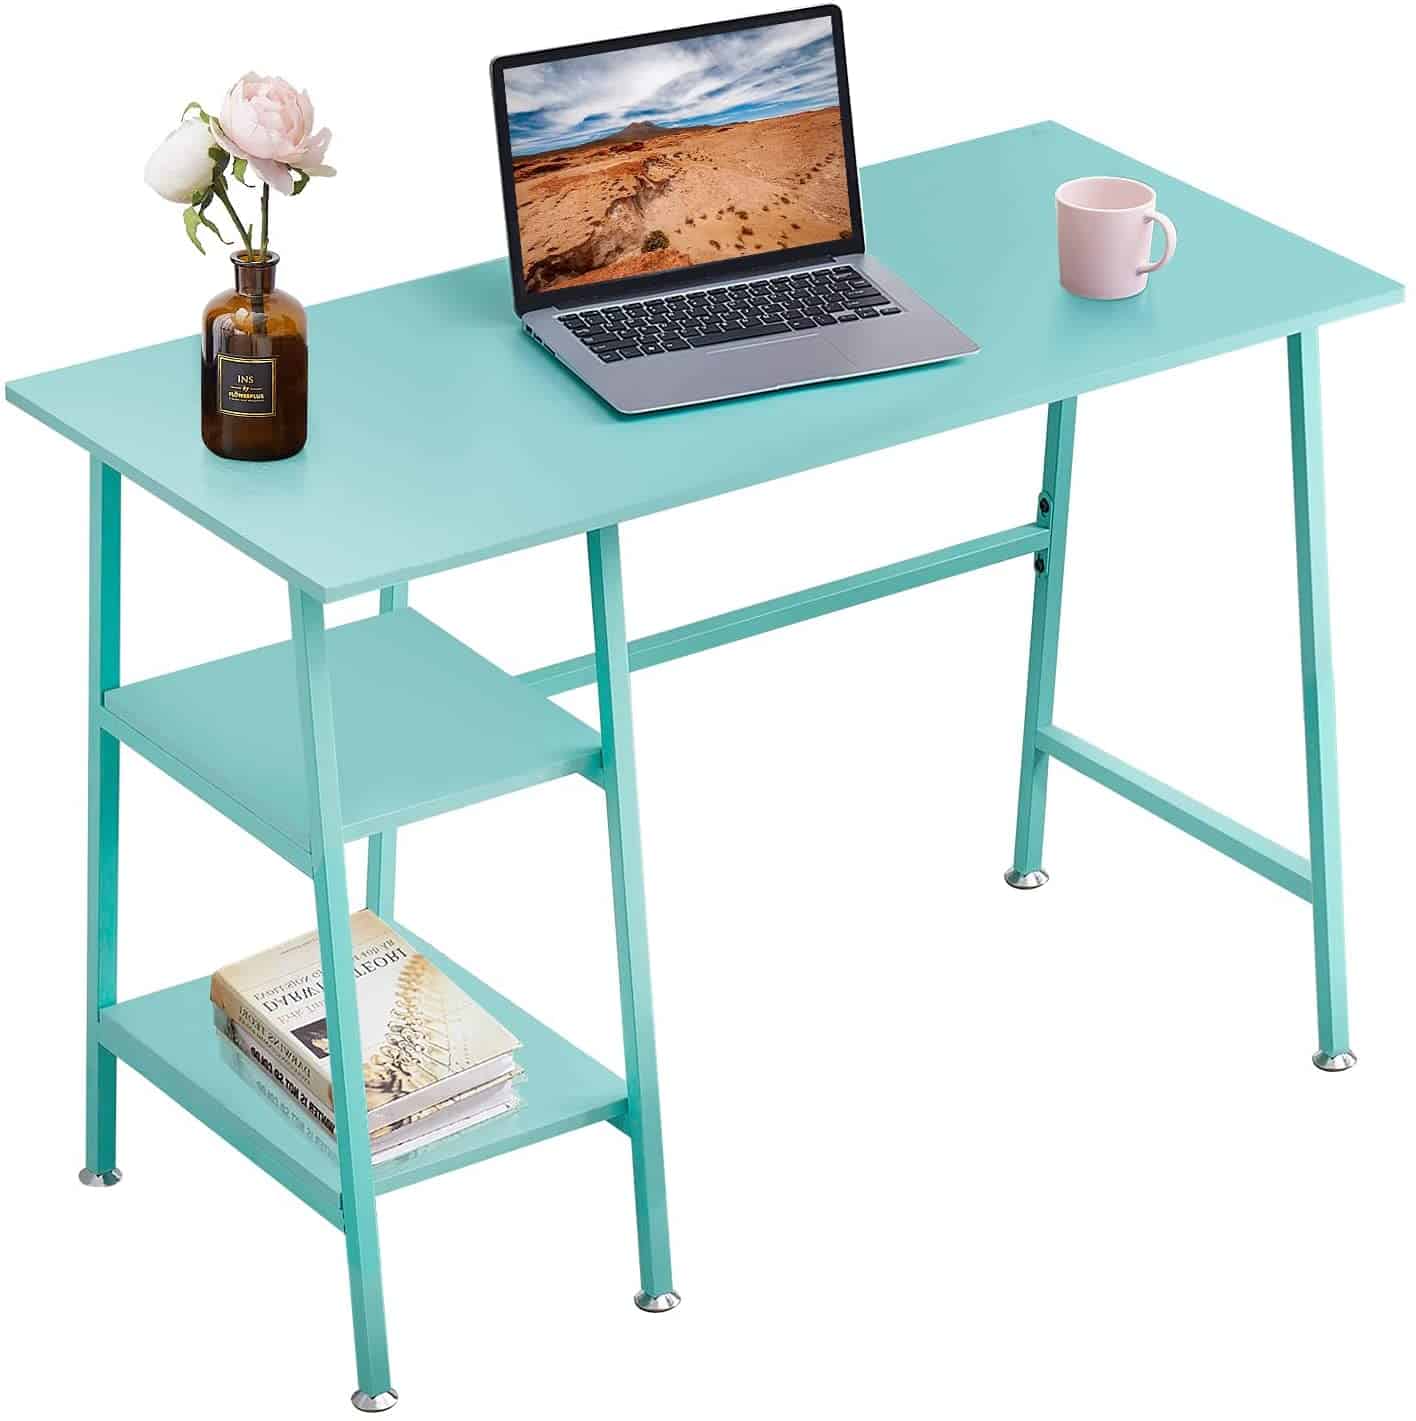 Colorful Work Desk for Home Office